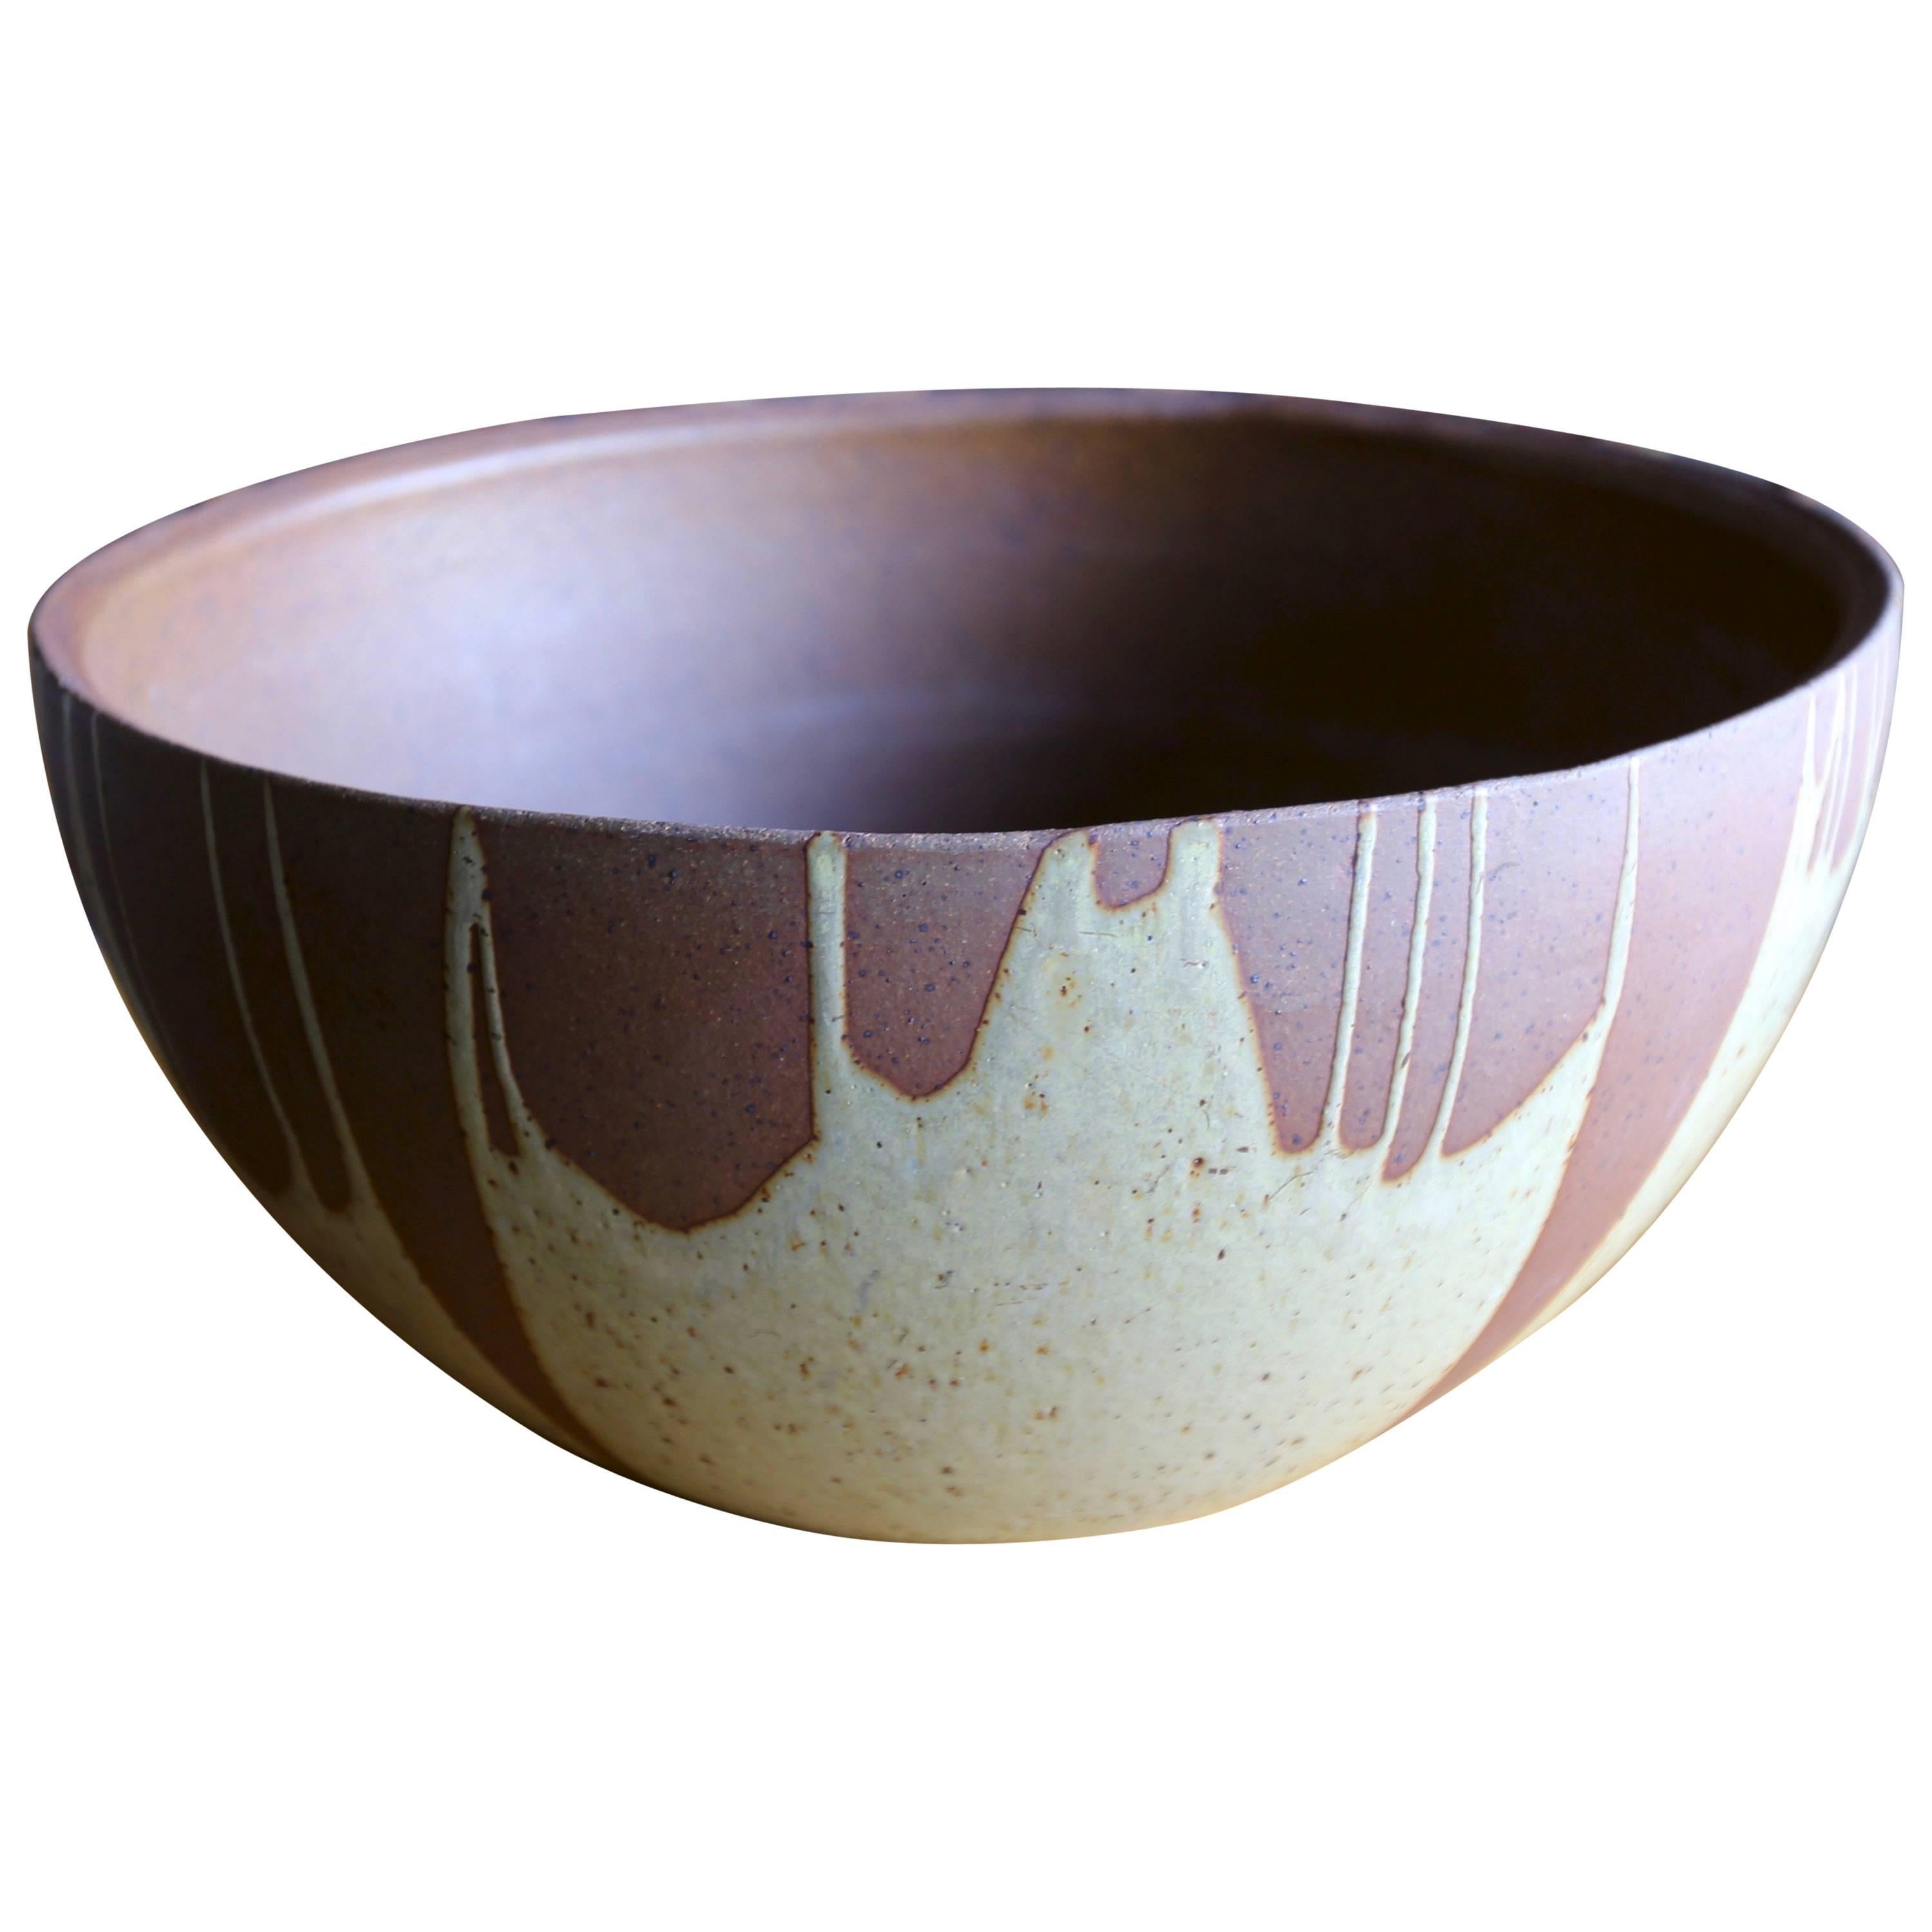 Large "Flame Glaze" Planter by David Cressey for Architectural Pottery